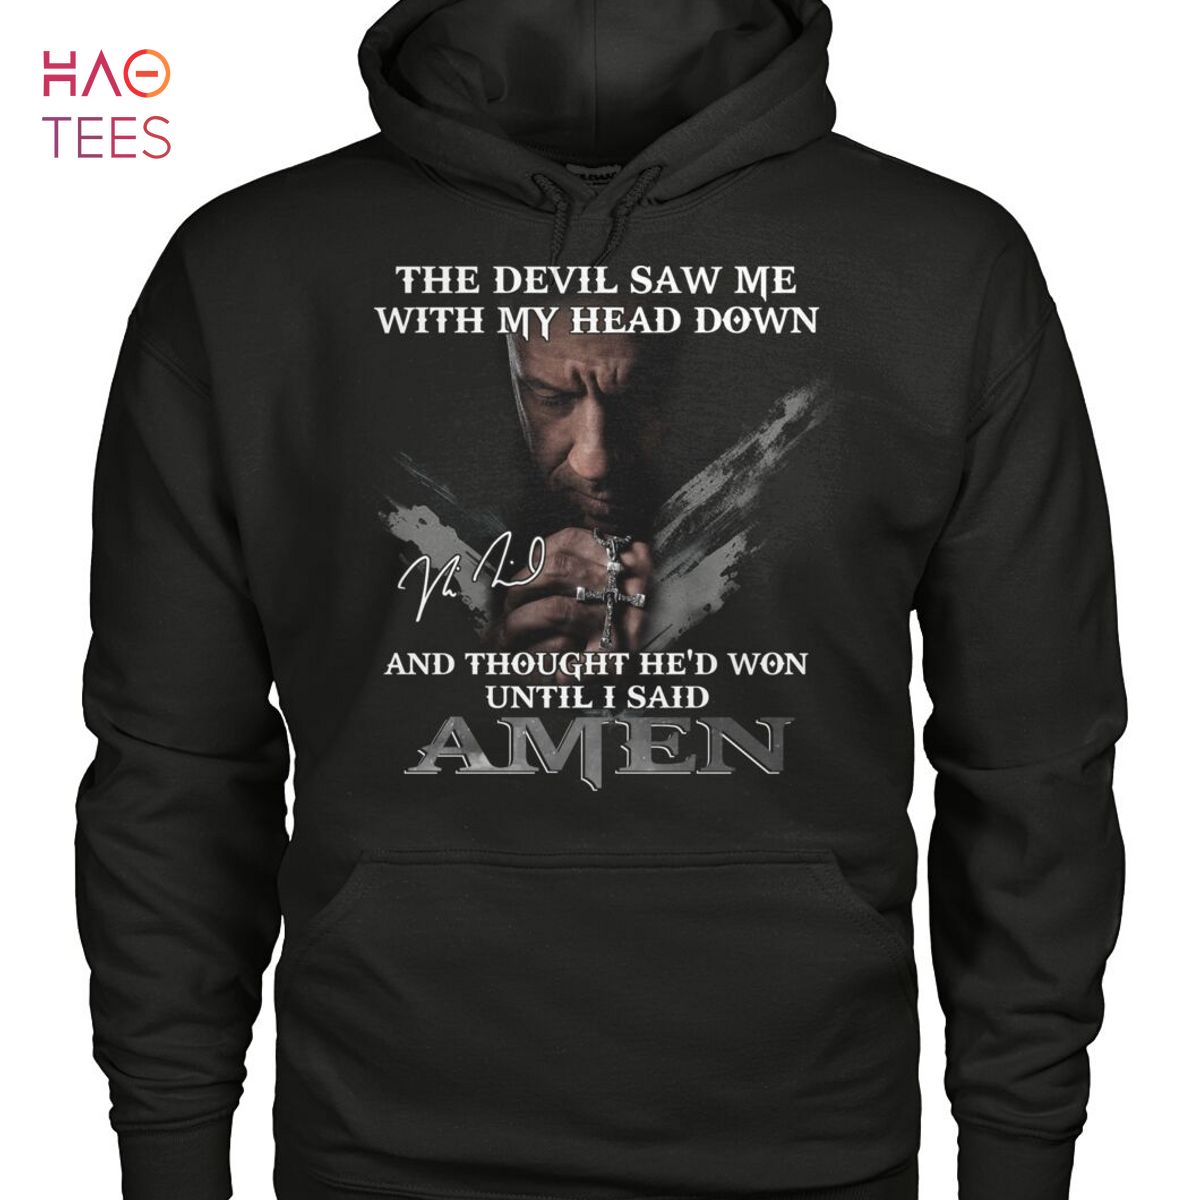 The Devil Saw Me With My Head Down And Thought He Won Until I Said A Men T-Shirt